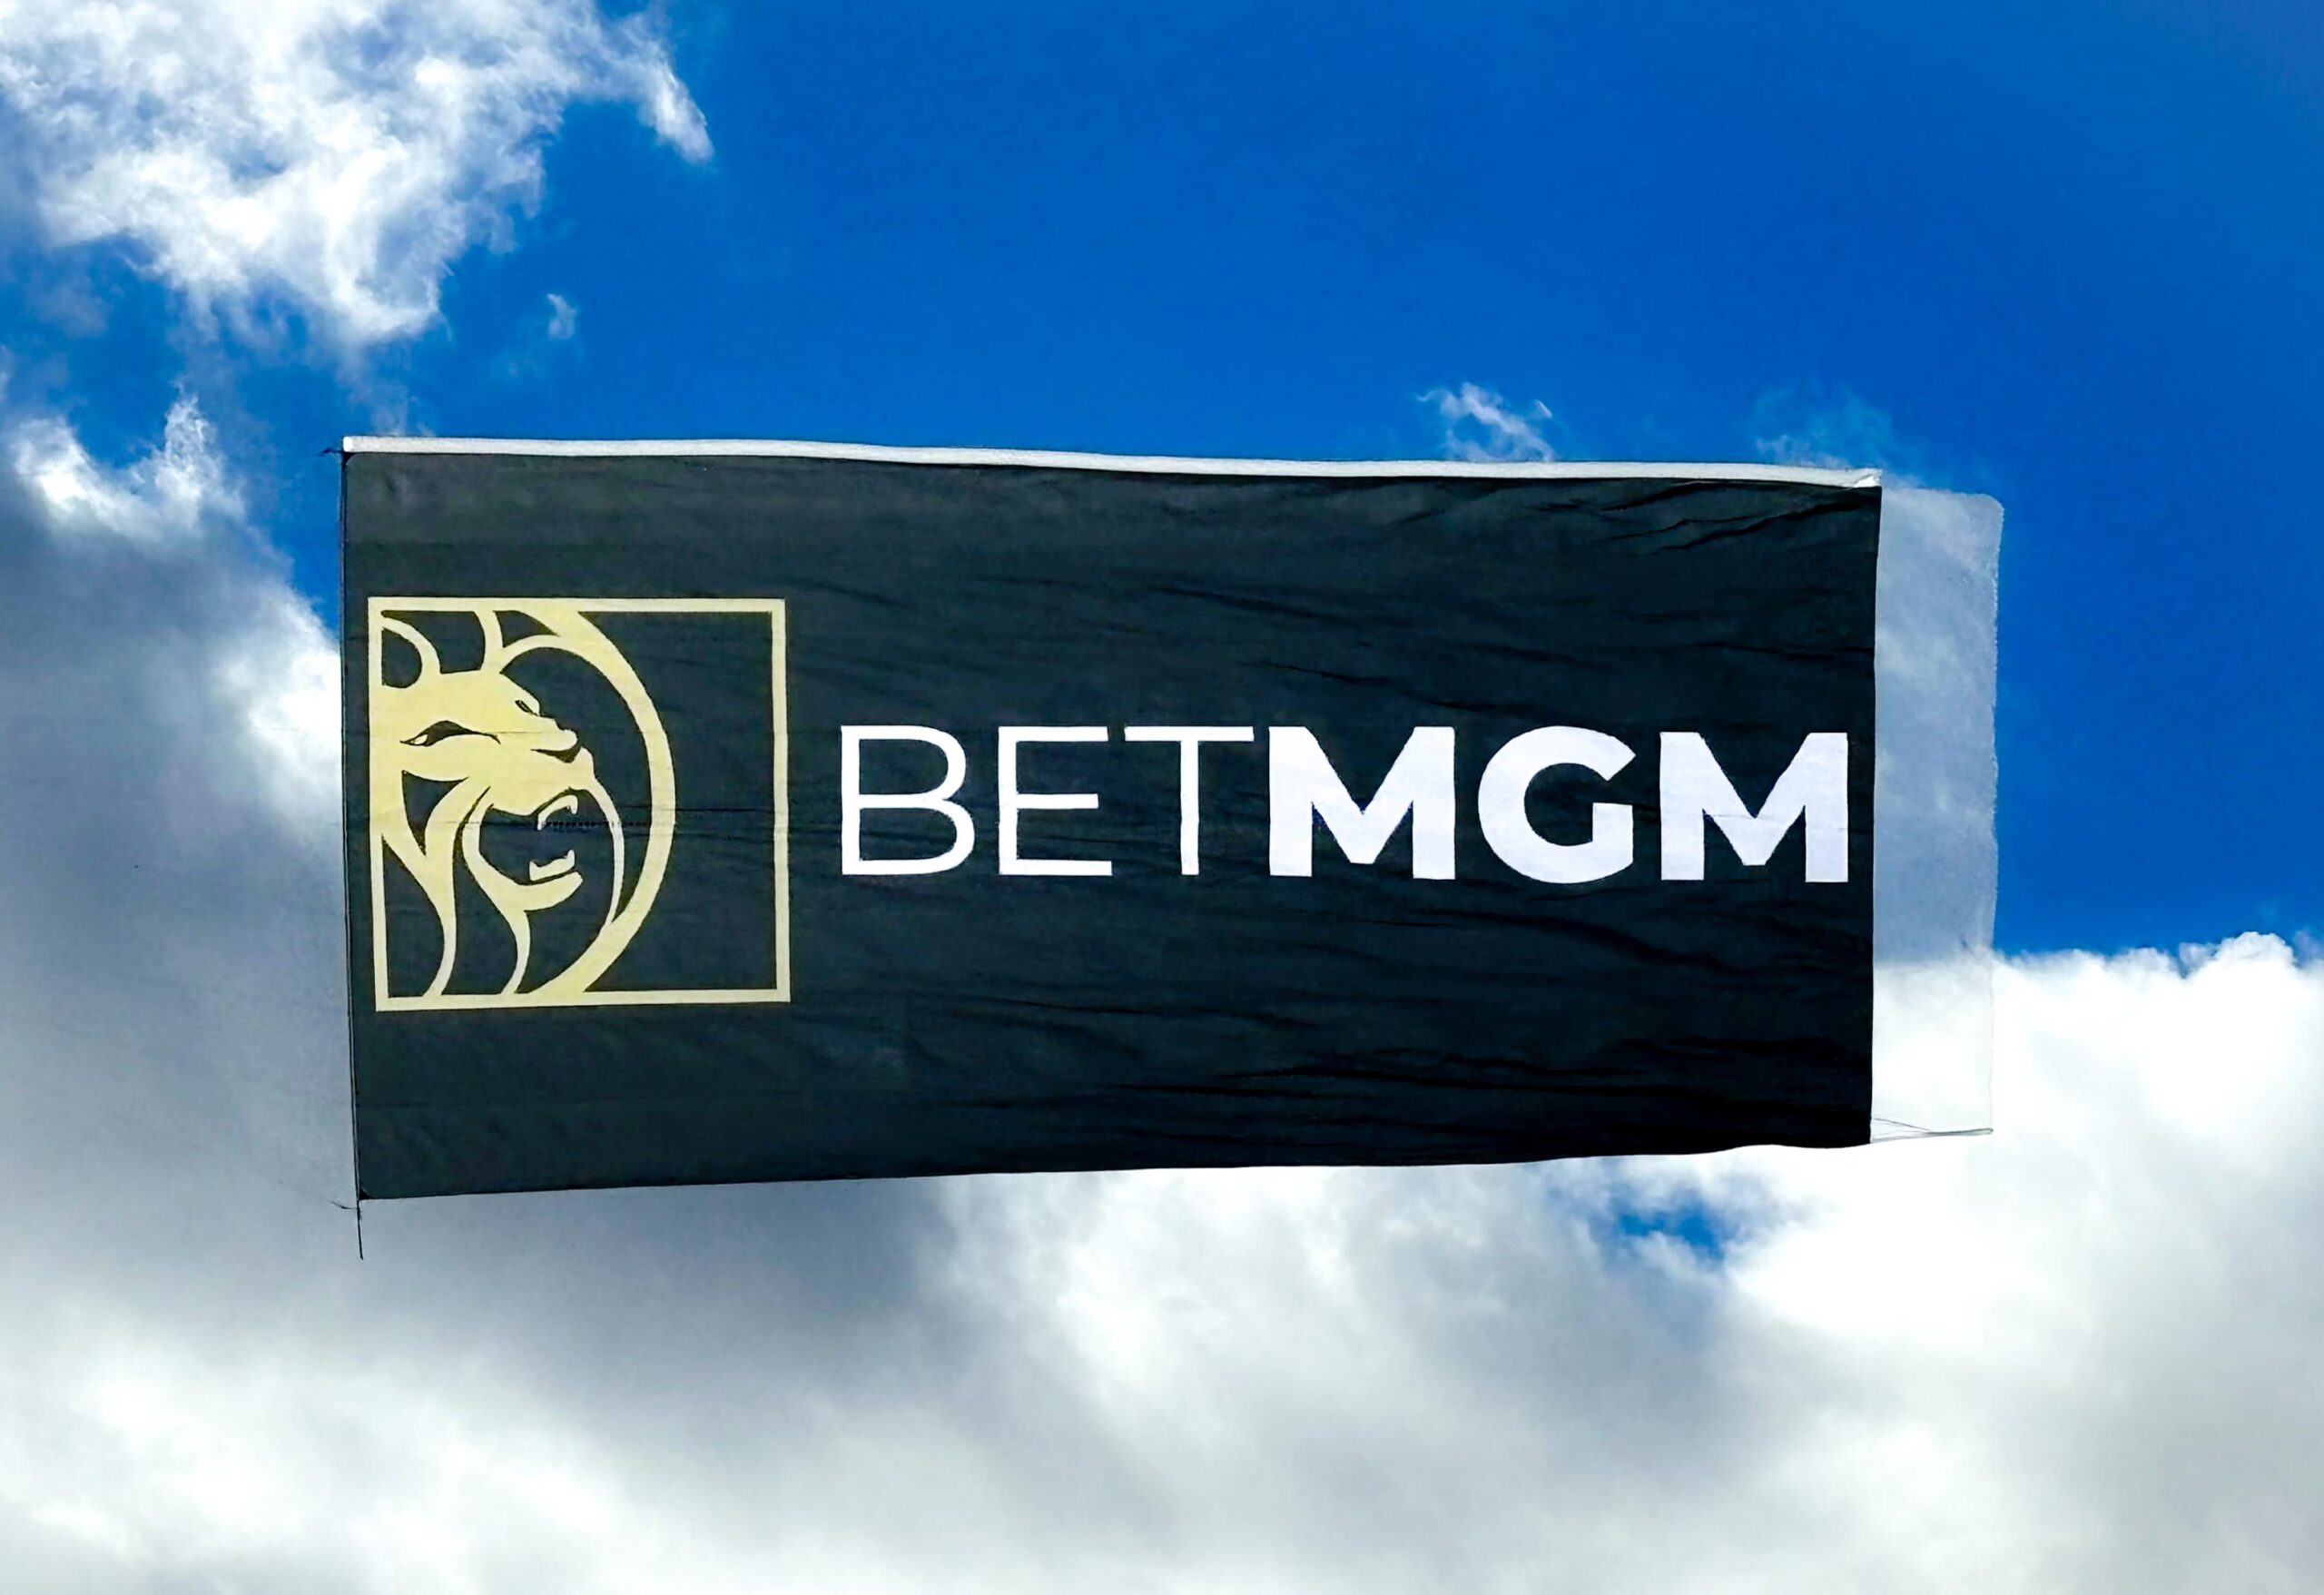 An image of a large aerial billboard soaring against a vibrant blue sky, prominently displaying the iconic BET MGM lion logo, symbolizing the brand's presence and allure in the entertainment and gaming industry.